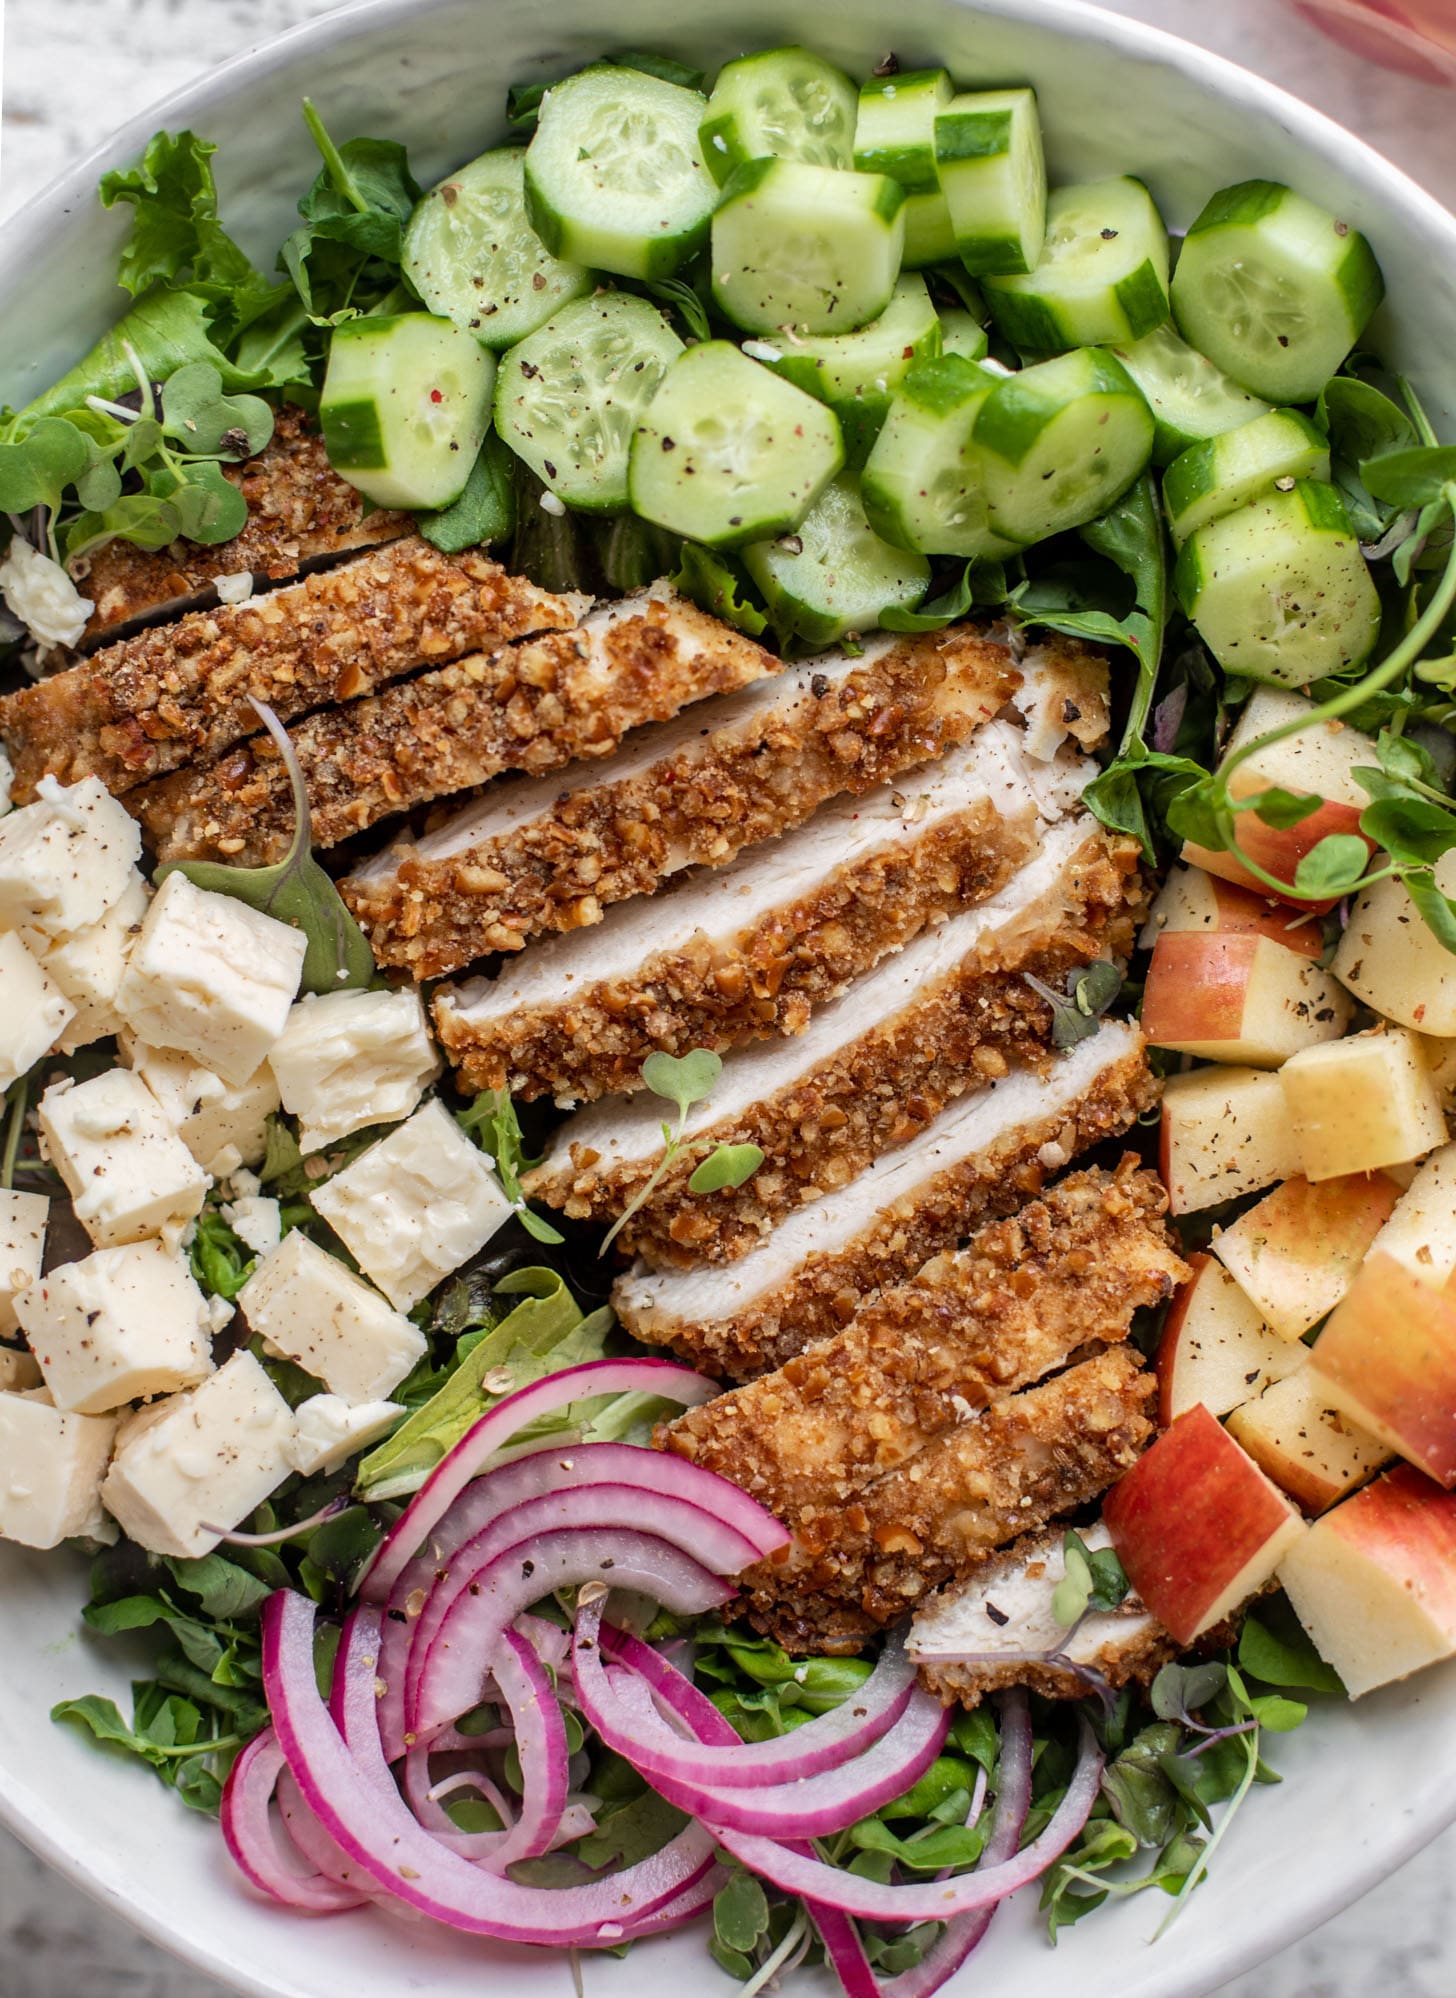 pretzel crusted chicken salad with onions, cheese, cucumbers and apples